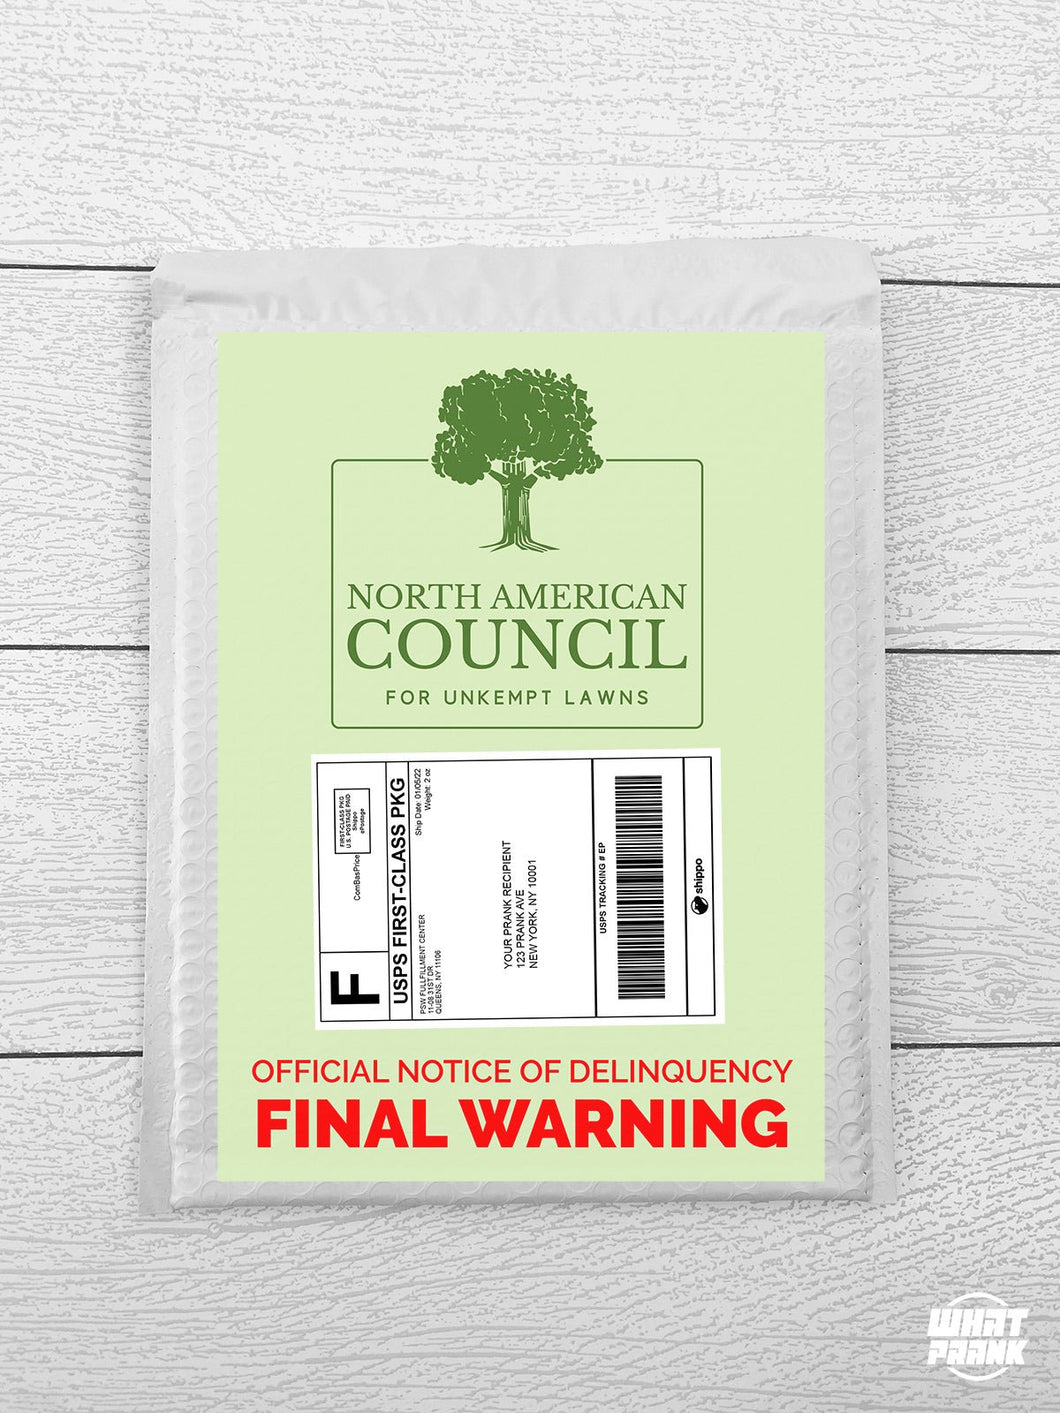 Council for Unkempt Lawns Final Warning |  | Mail Prank | What Prank